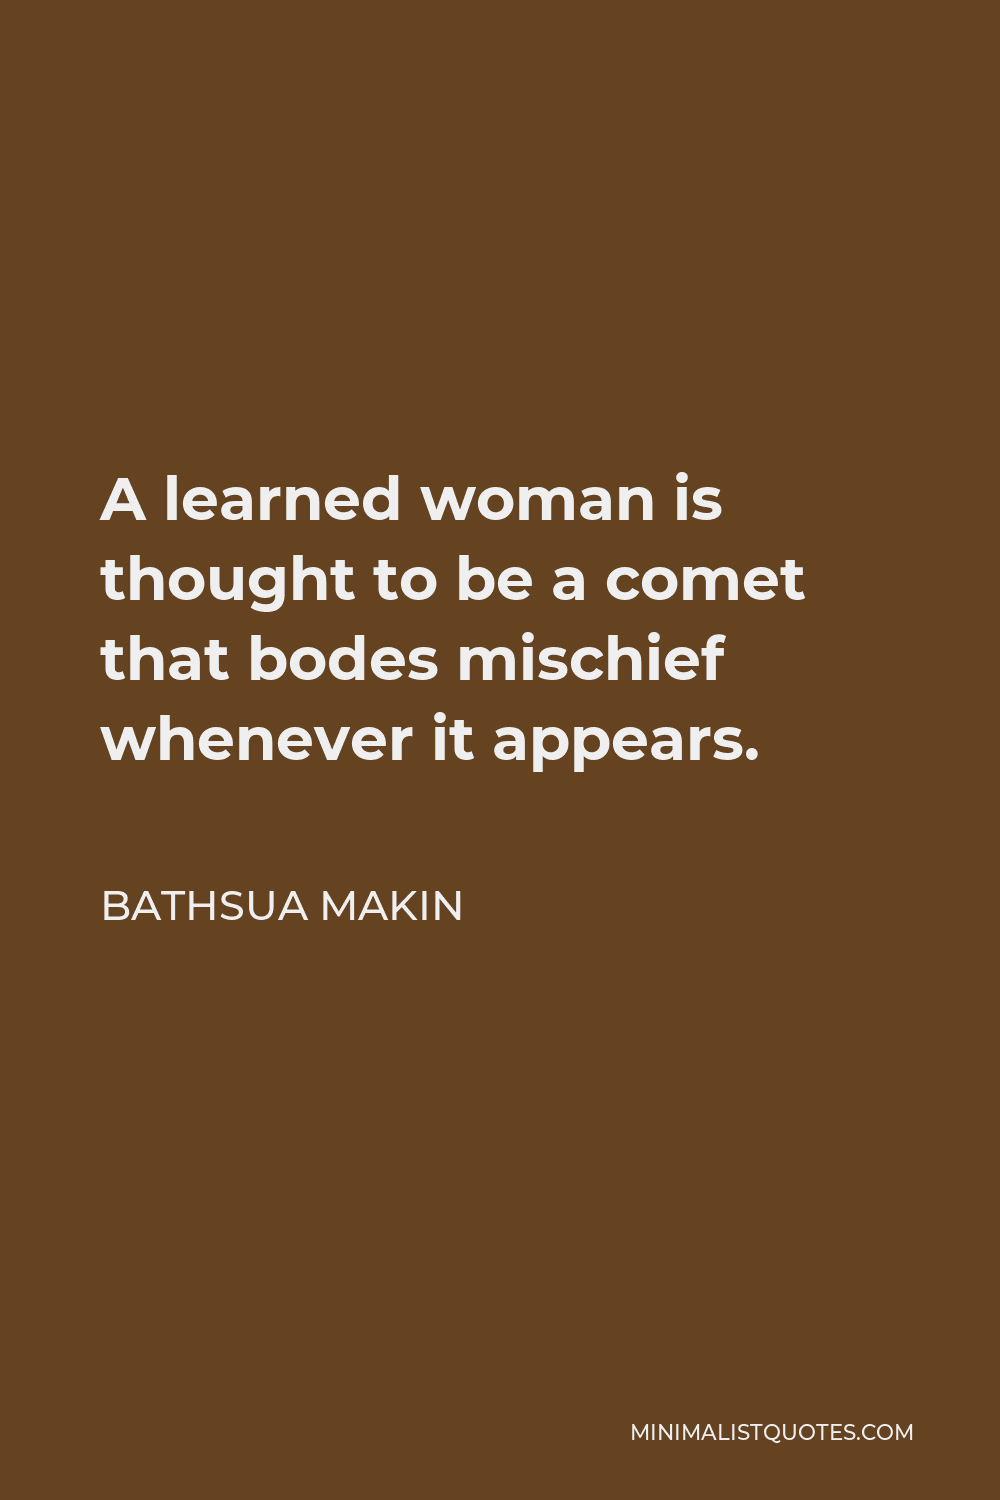 Bathsua Makin Quote - A learned woman is thought to be a comet that bodes mischief whenever it appears.